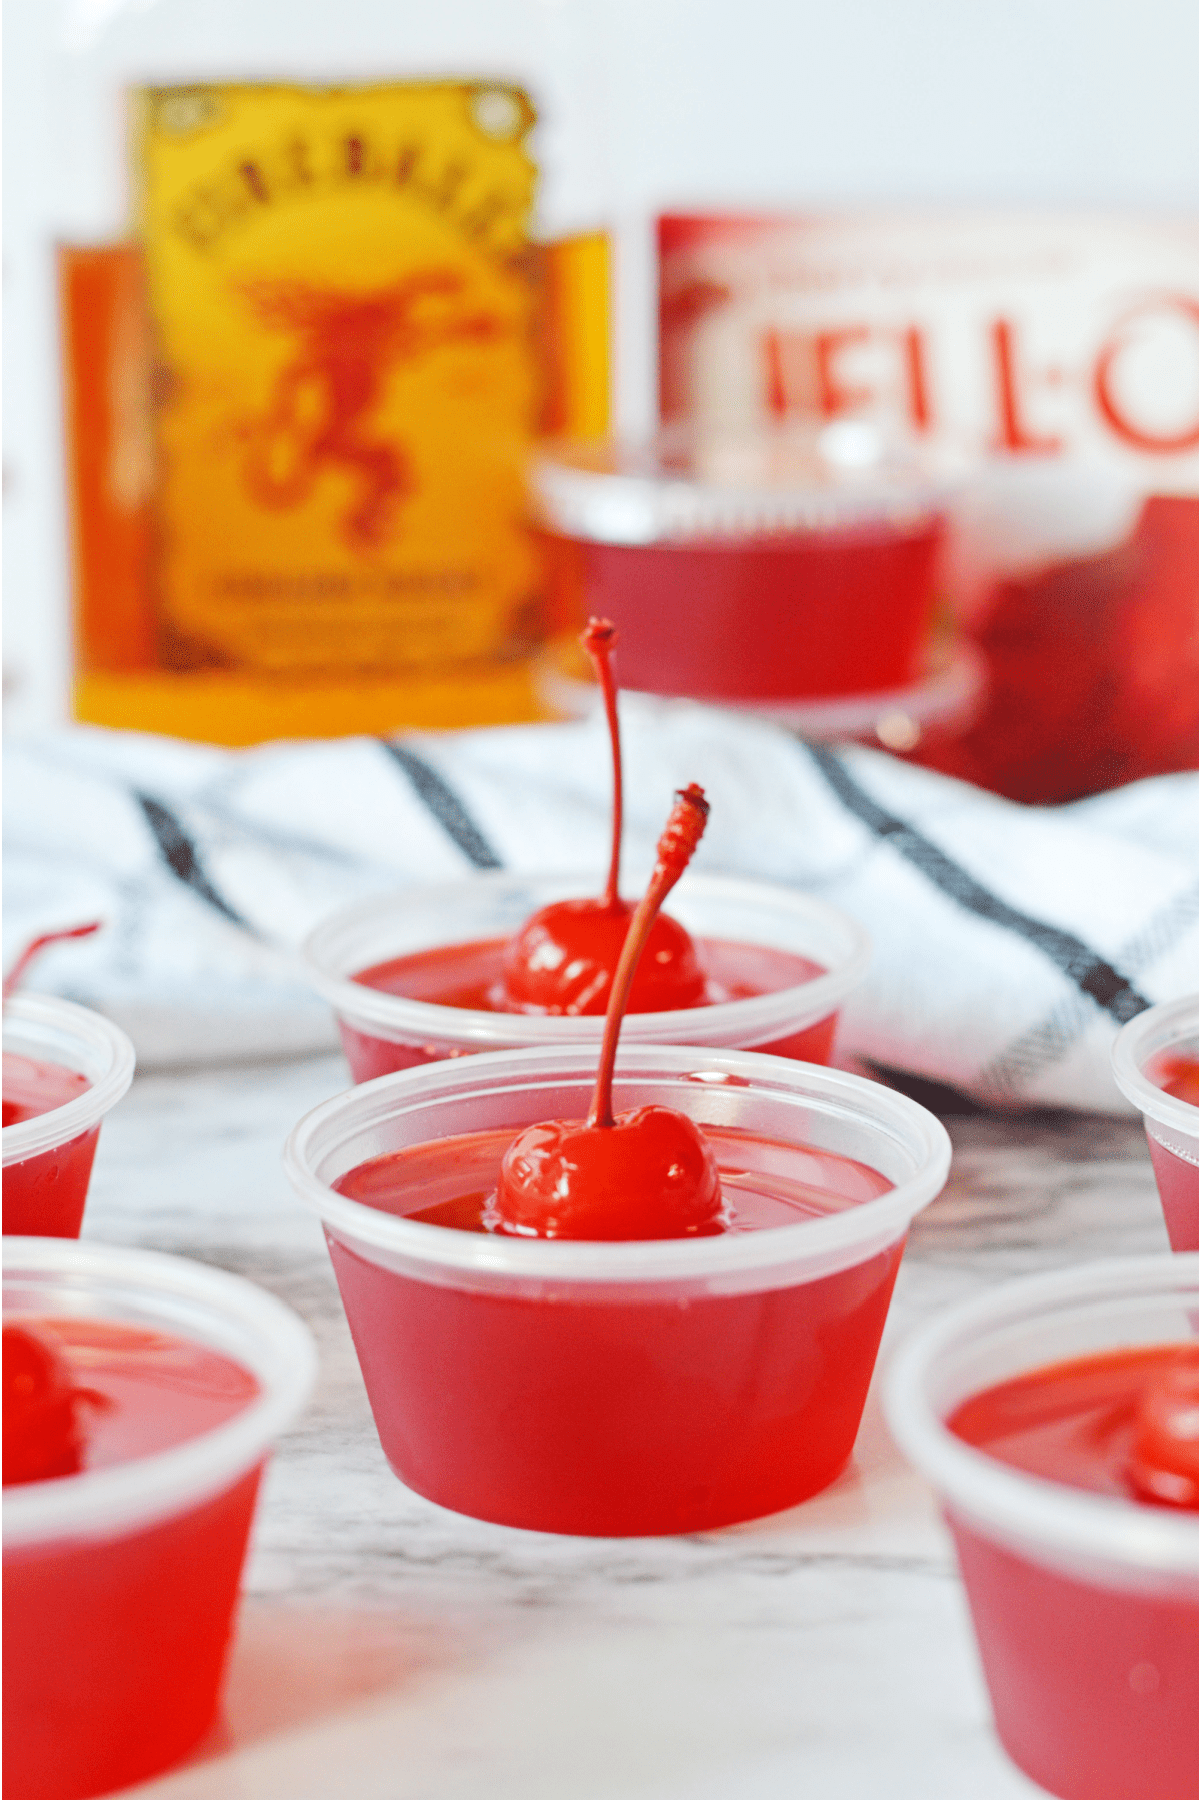 Jello shots with bottle of fireball in background